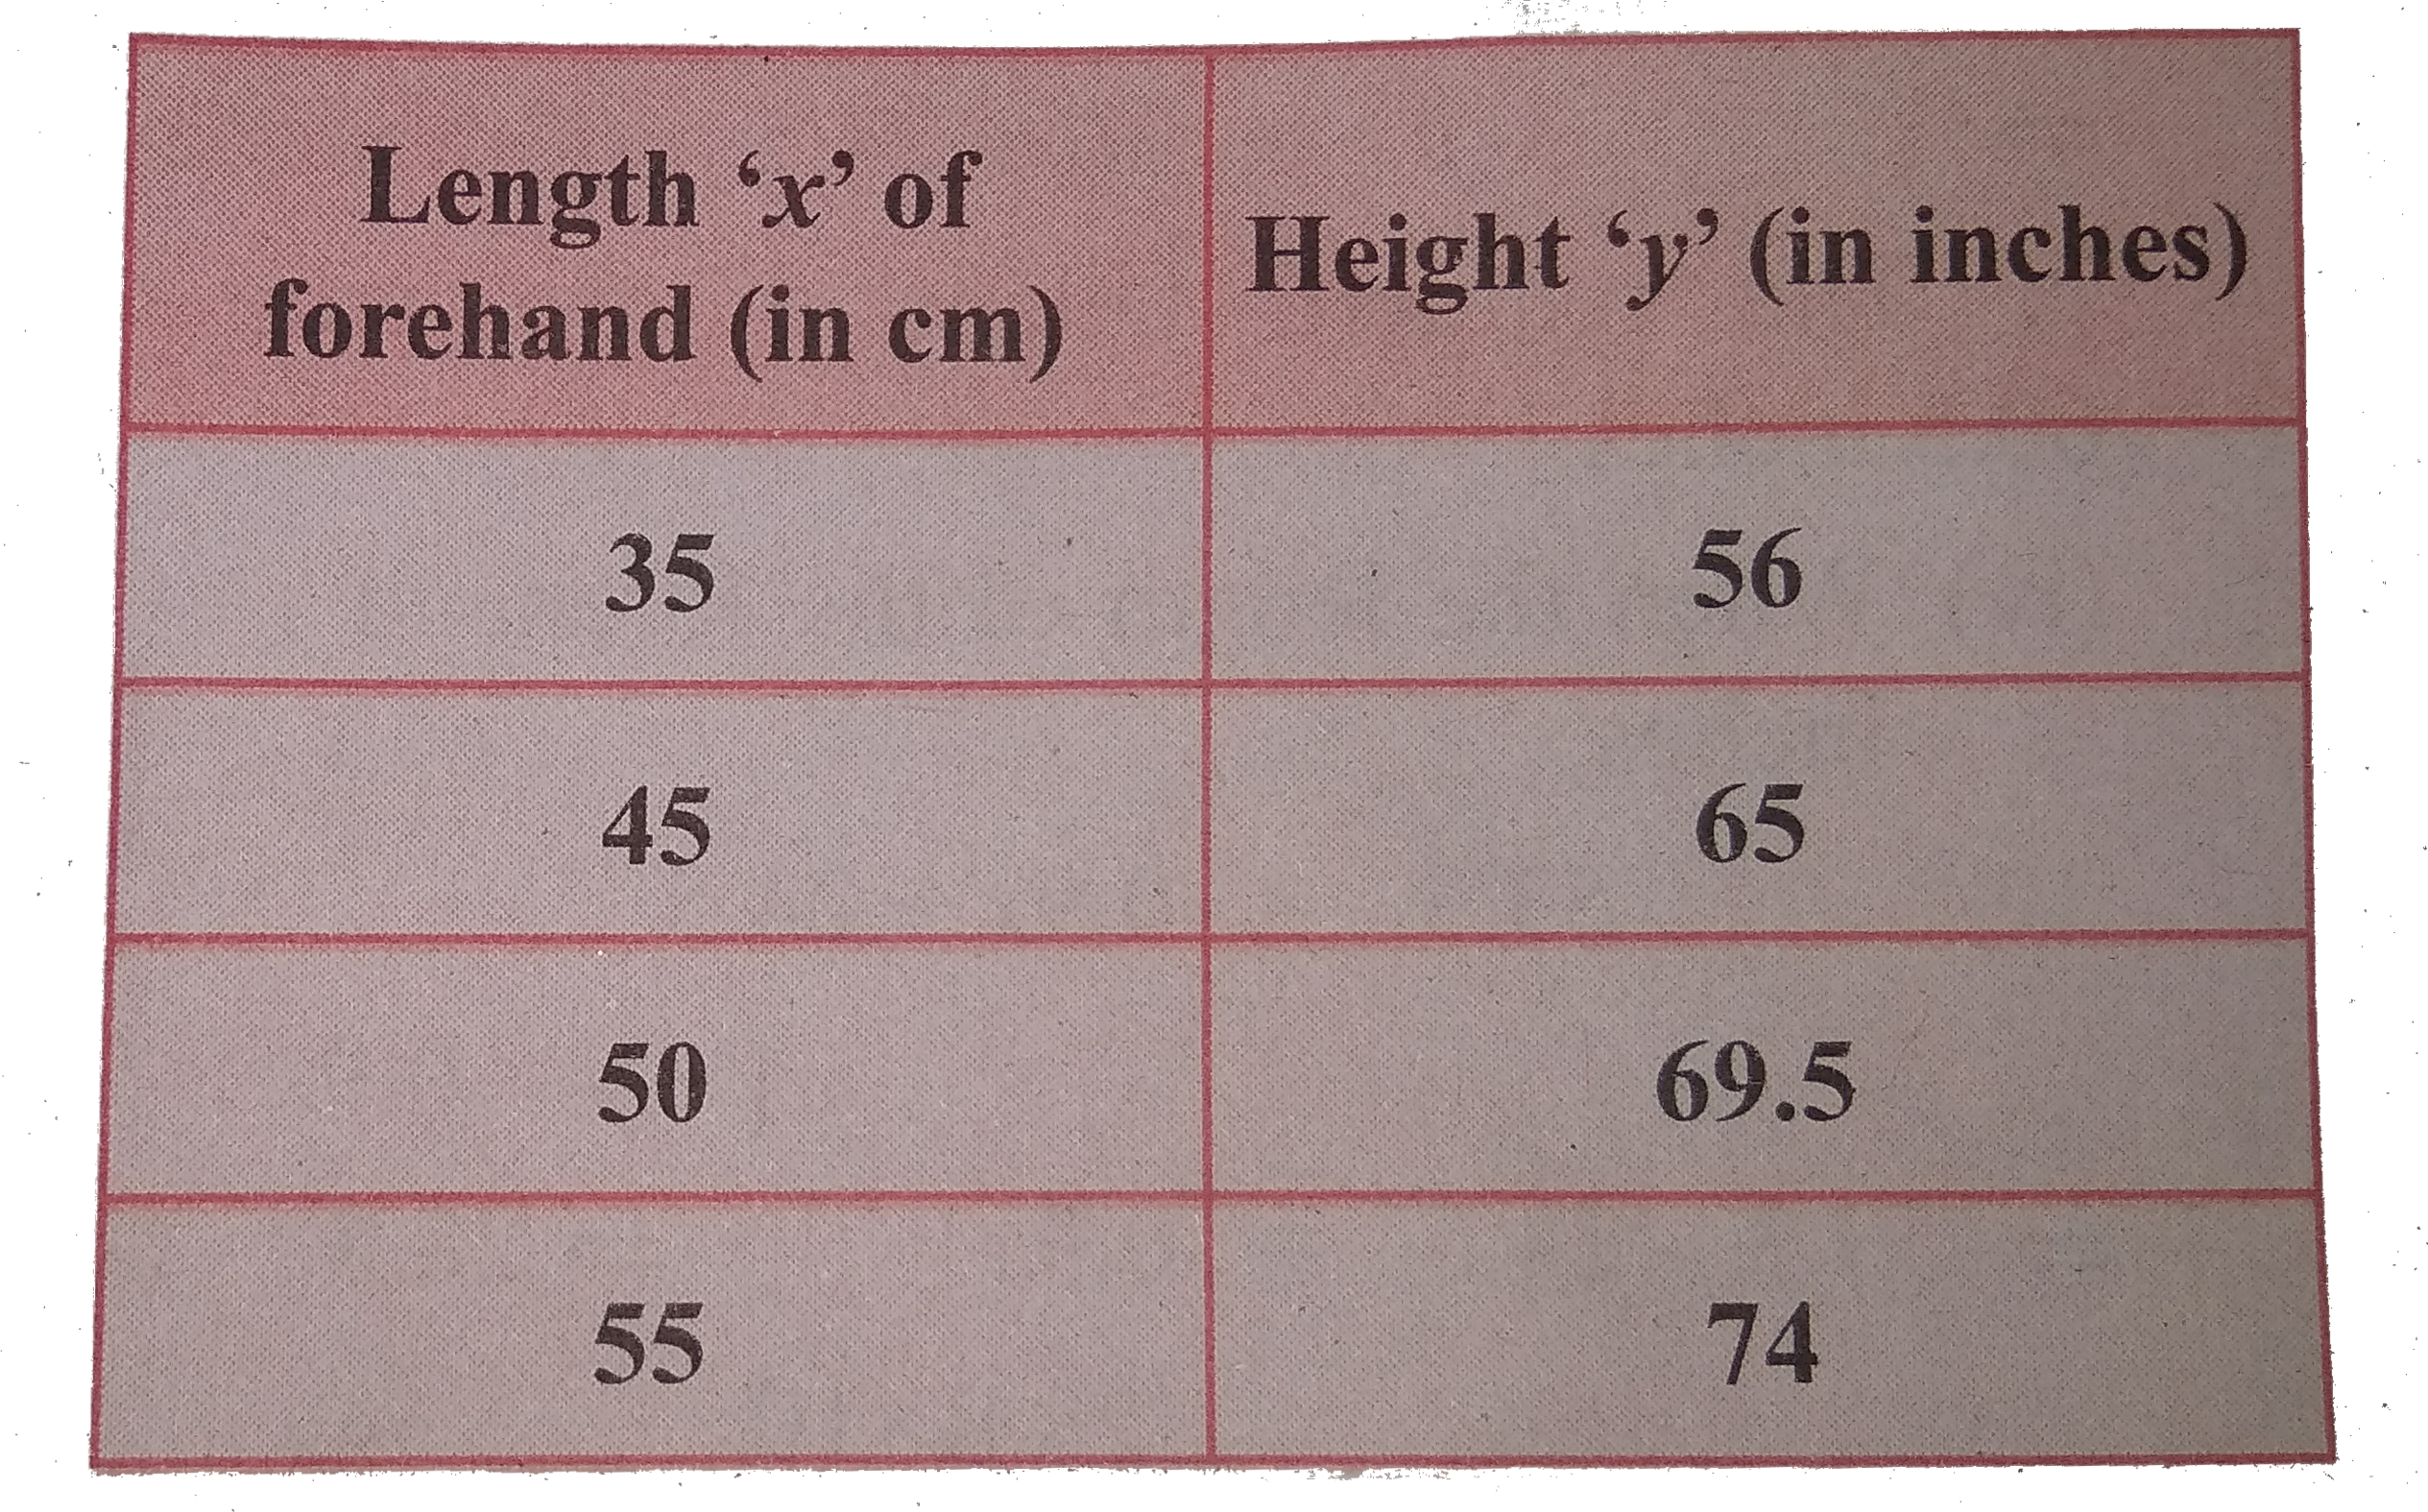 The data in the adjcent table depicts the length of a woman's foreheads and her corresponding height. Based on this data, a student finds a relationship between the height (y) and the forehead length (x) as y=ax+b, where a, b are constants.     Find a and b.